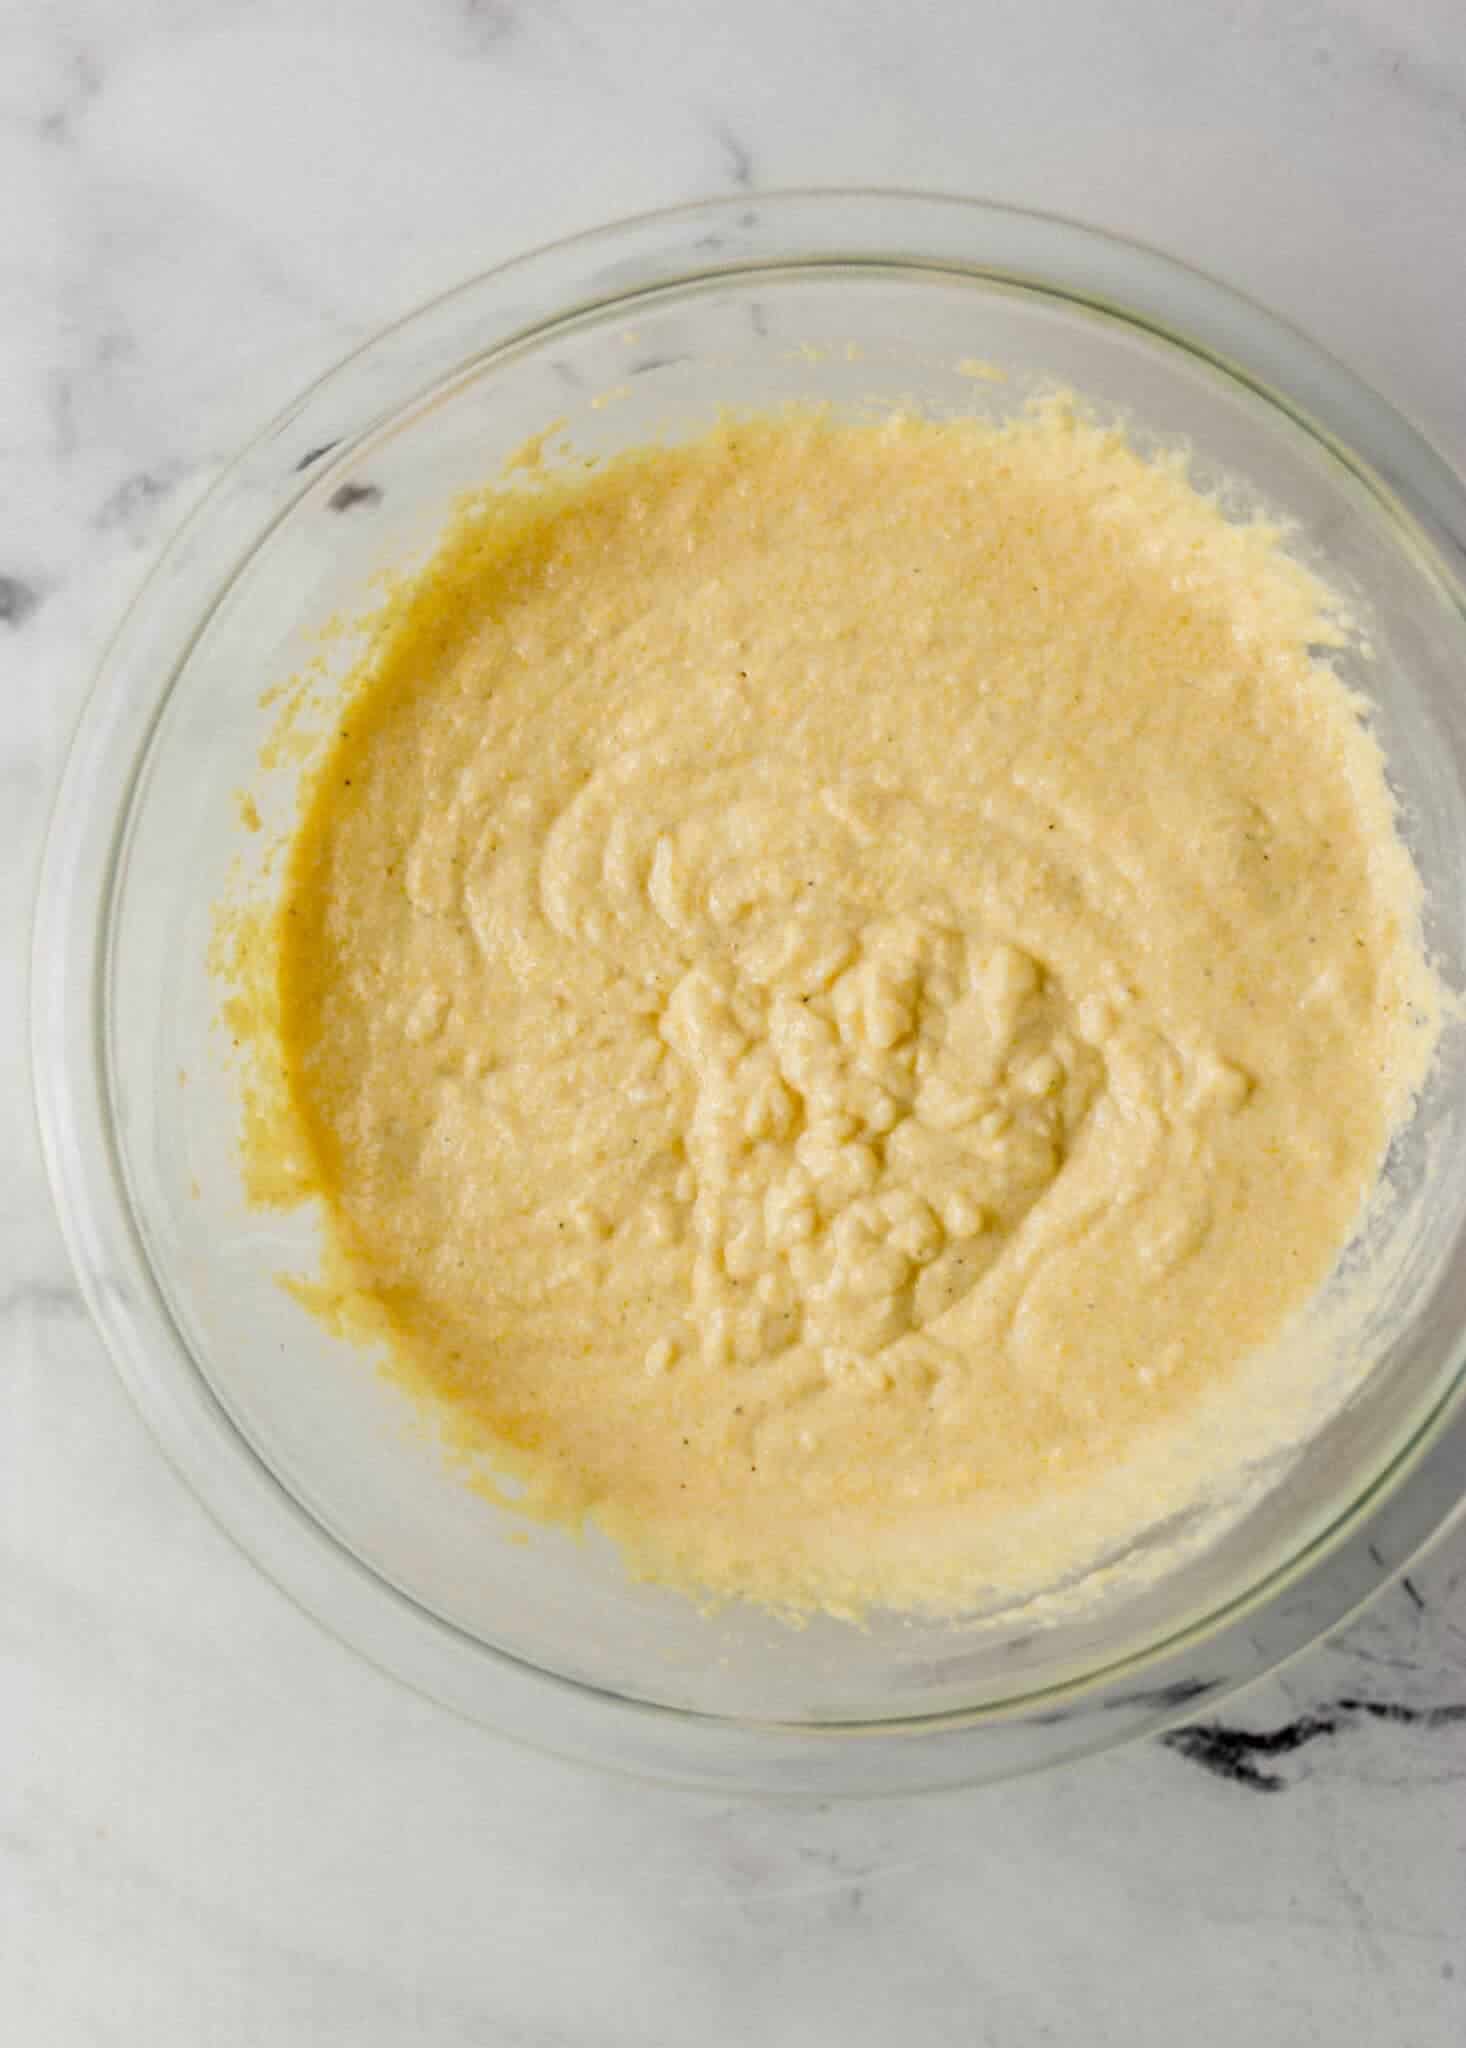 cornbread ingredients mixed together in glass mixing bowl 